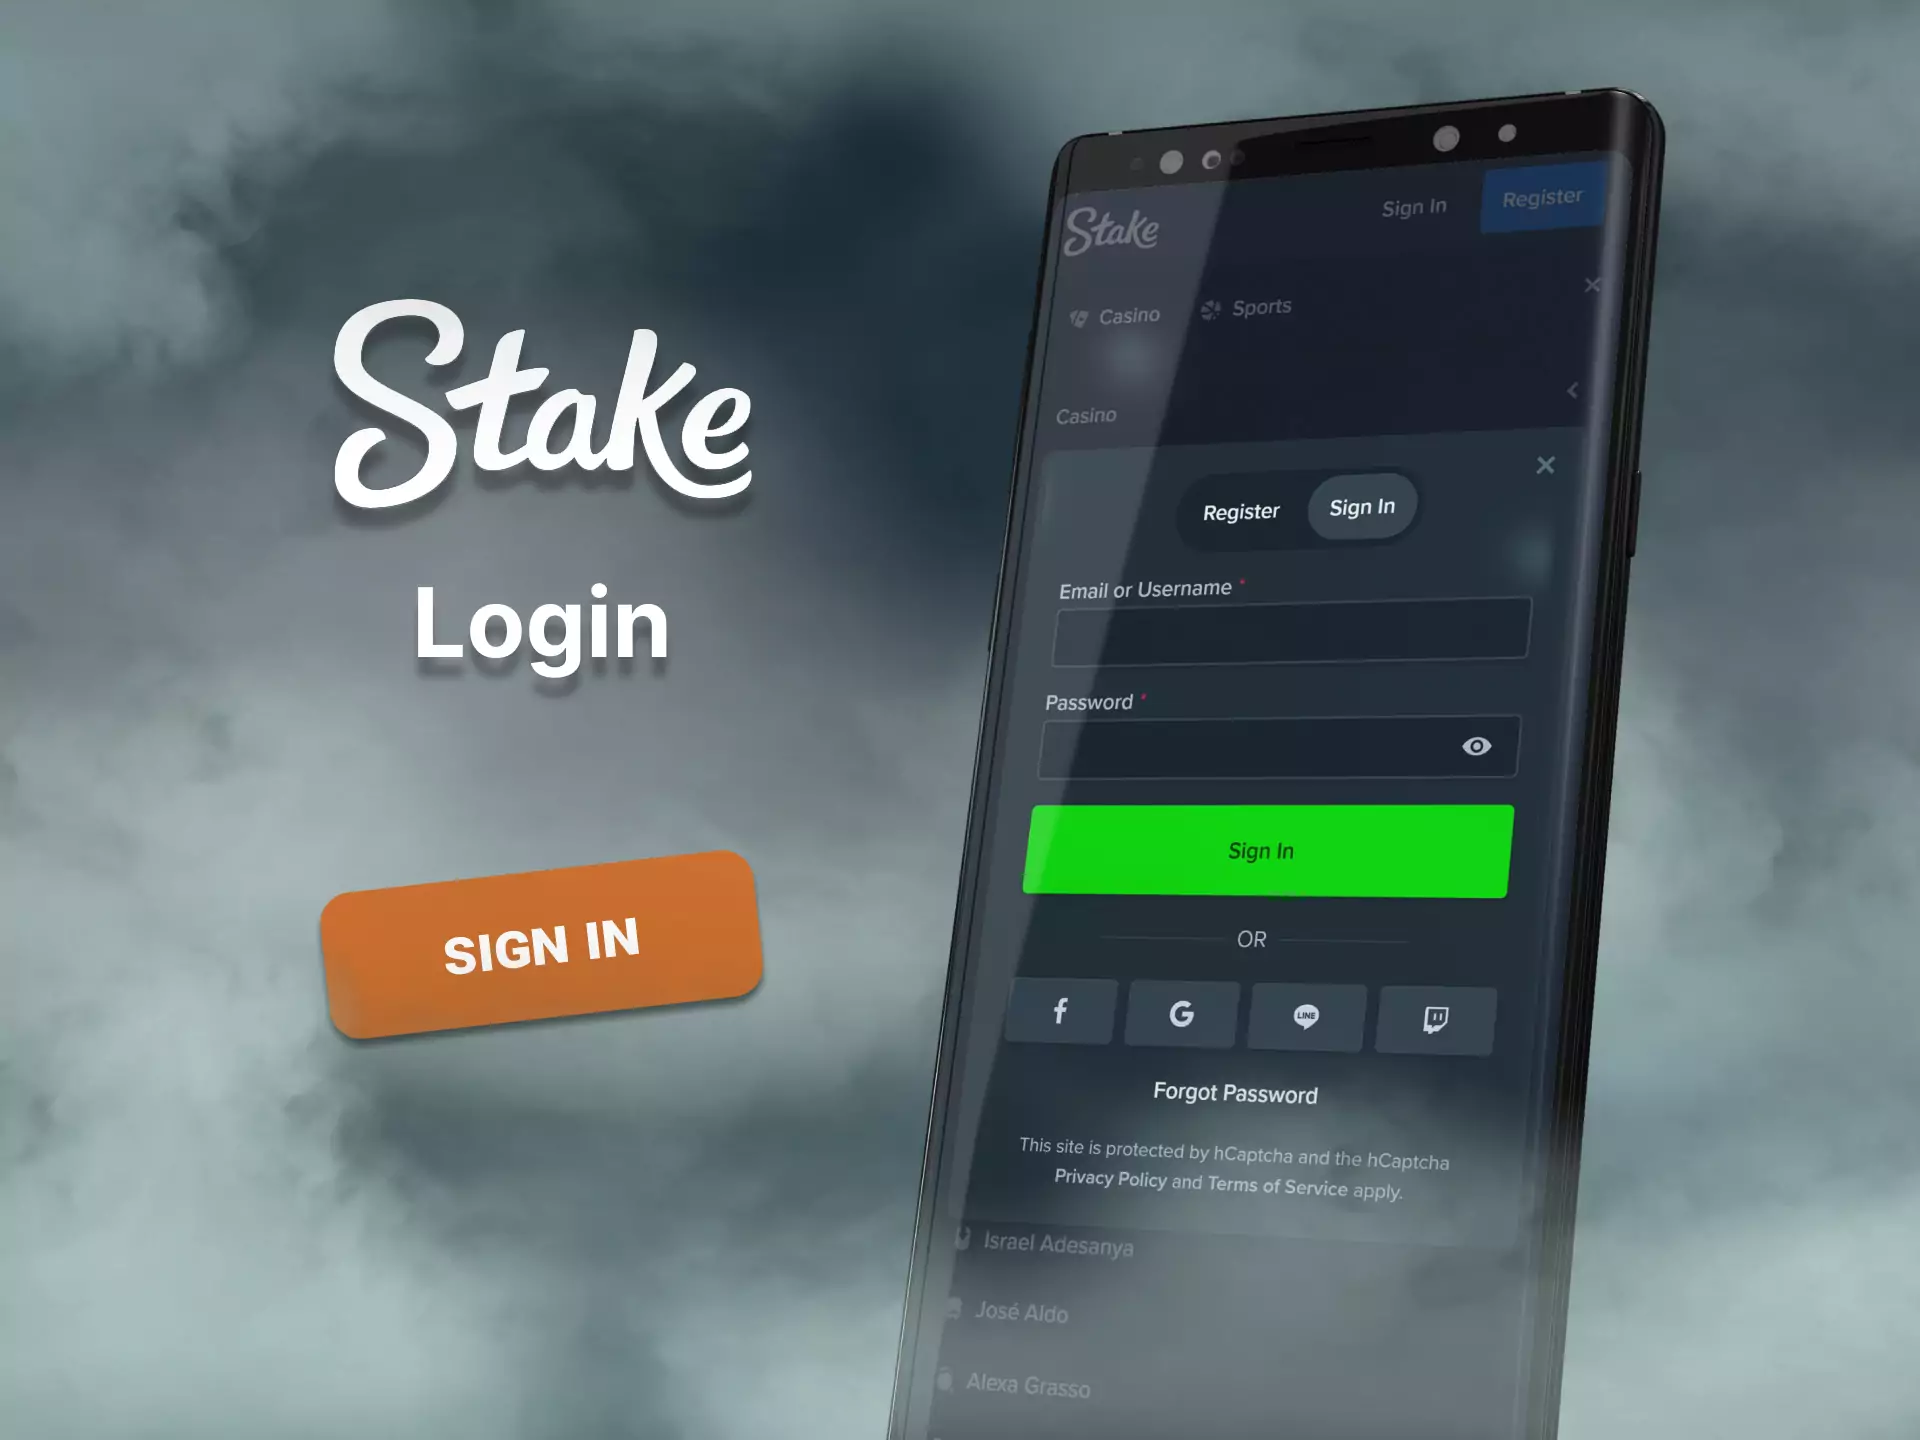 Log in to your account Stake.com, it's simple and easy.